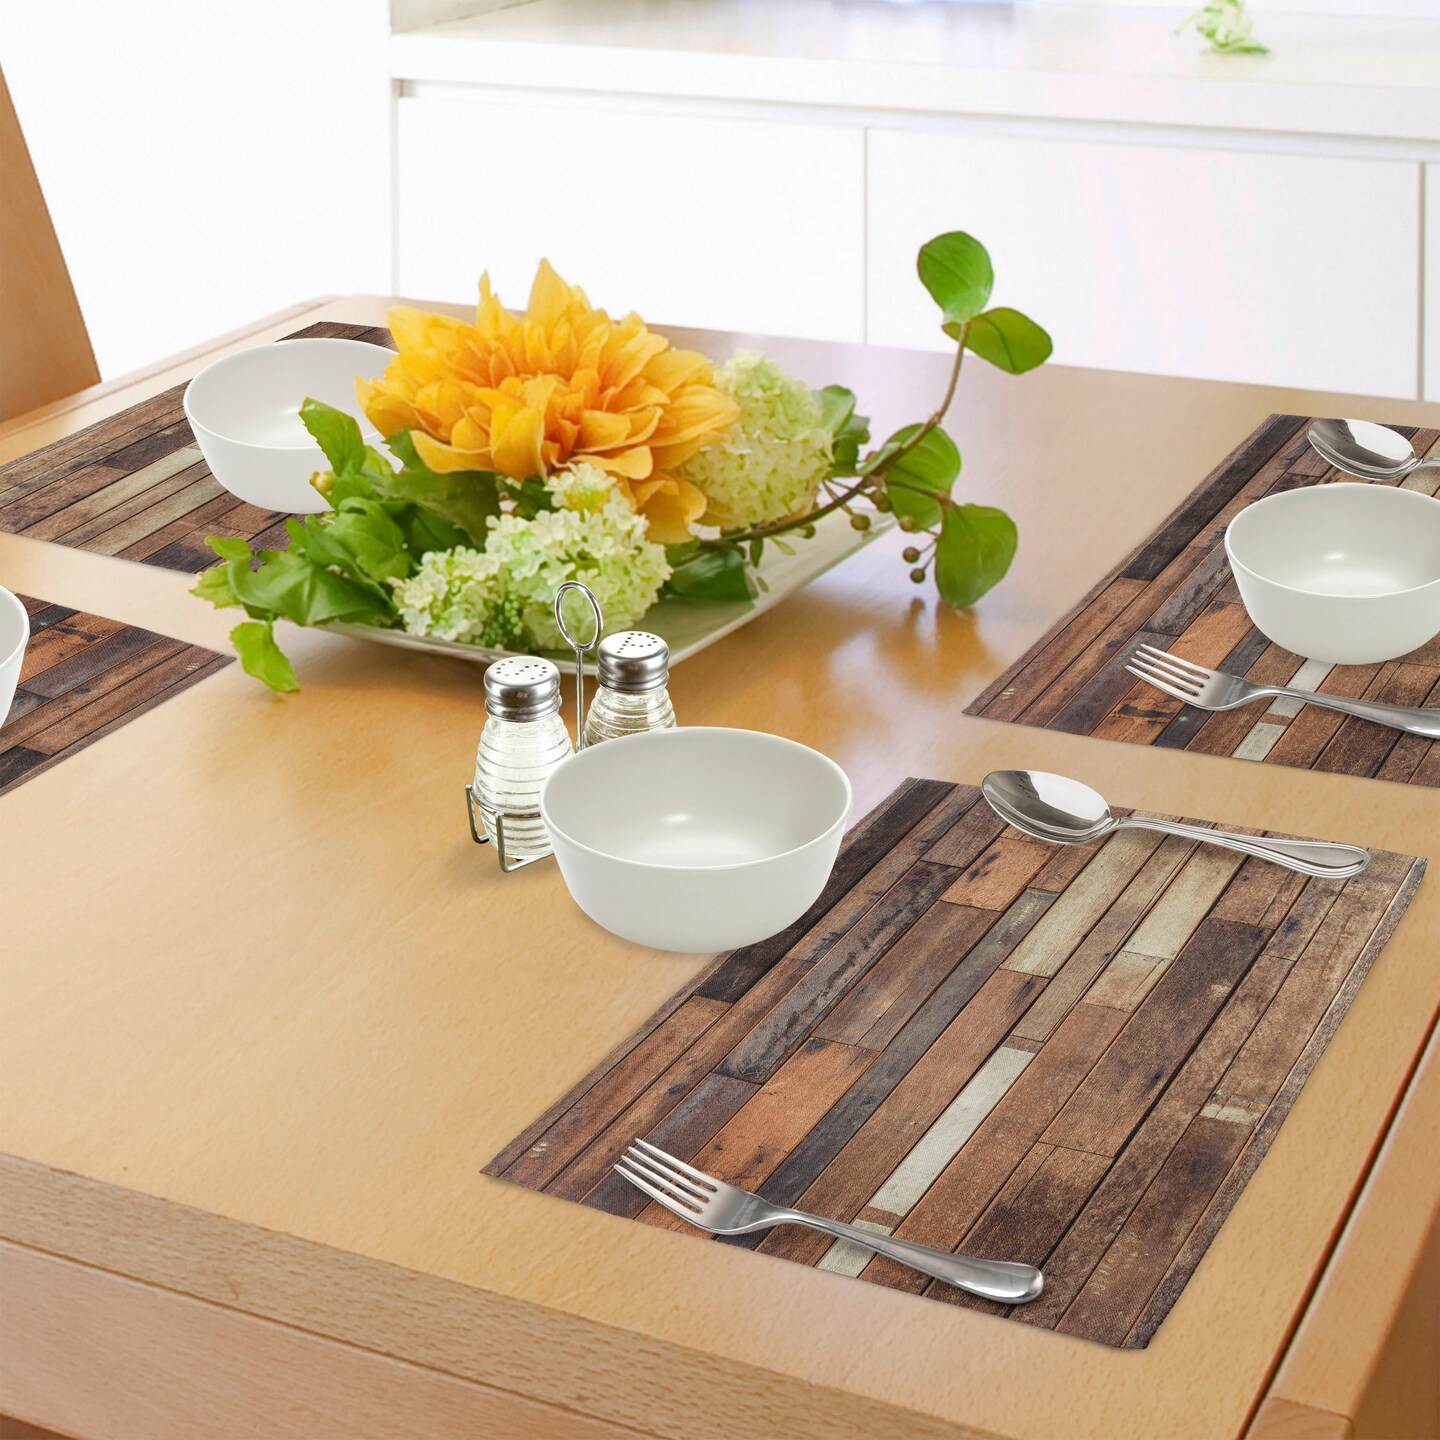 Ambesonne Wooden Print Place Mats Set of 4, Rustic Floor Planks Grungy Look  Farm House Country Style Walnut Oak Grain Image, Washable Fabric Placemats  for Dining Table, Standard Size, Brown